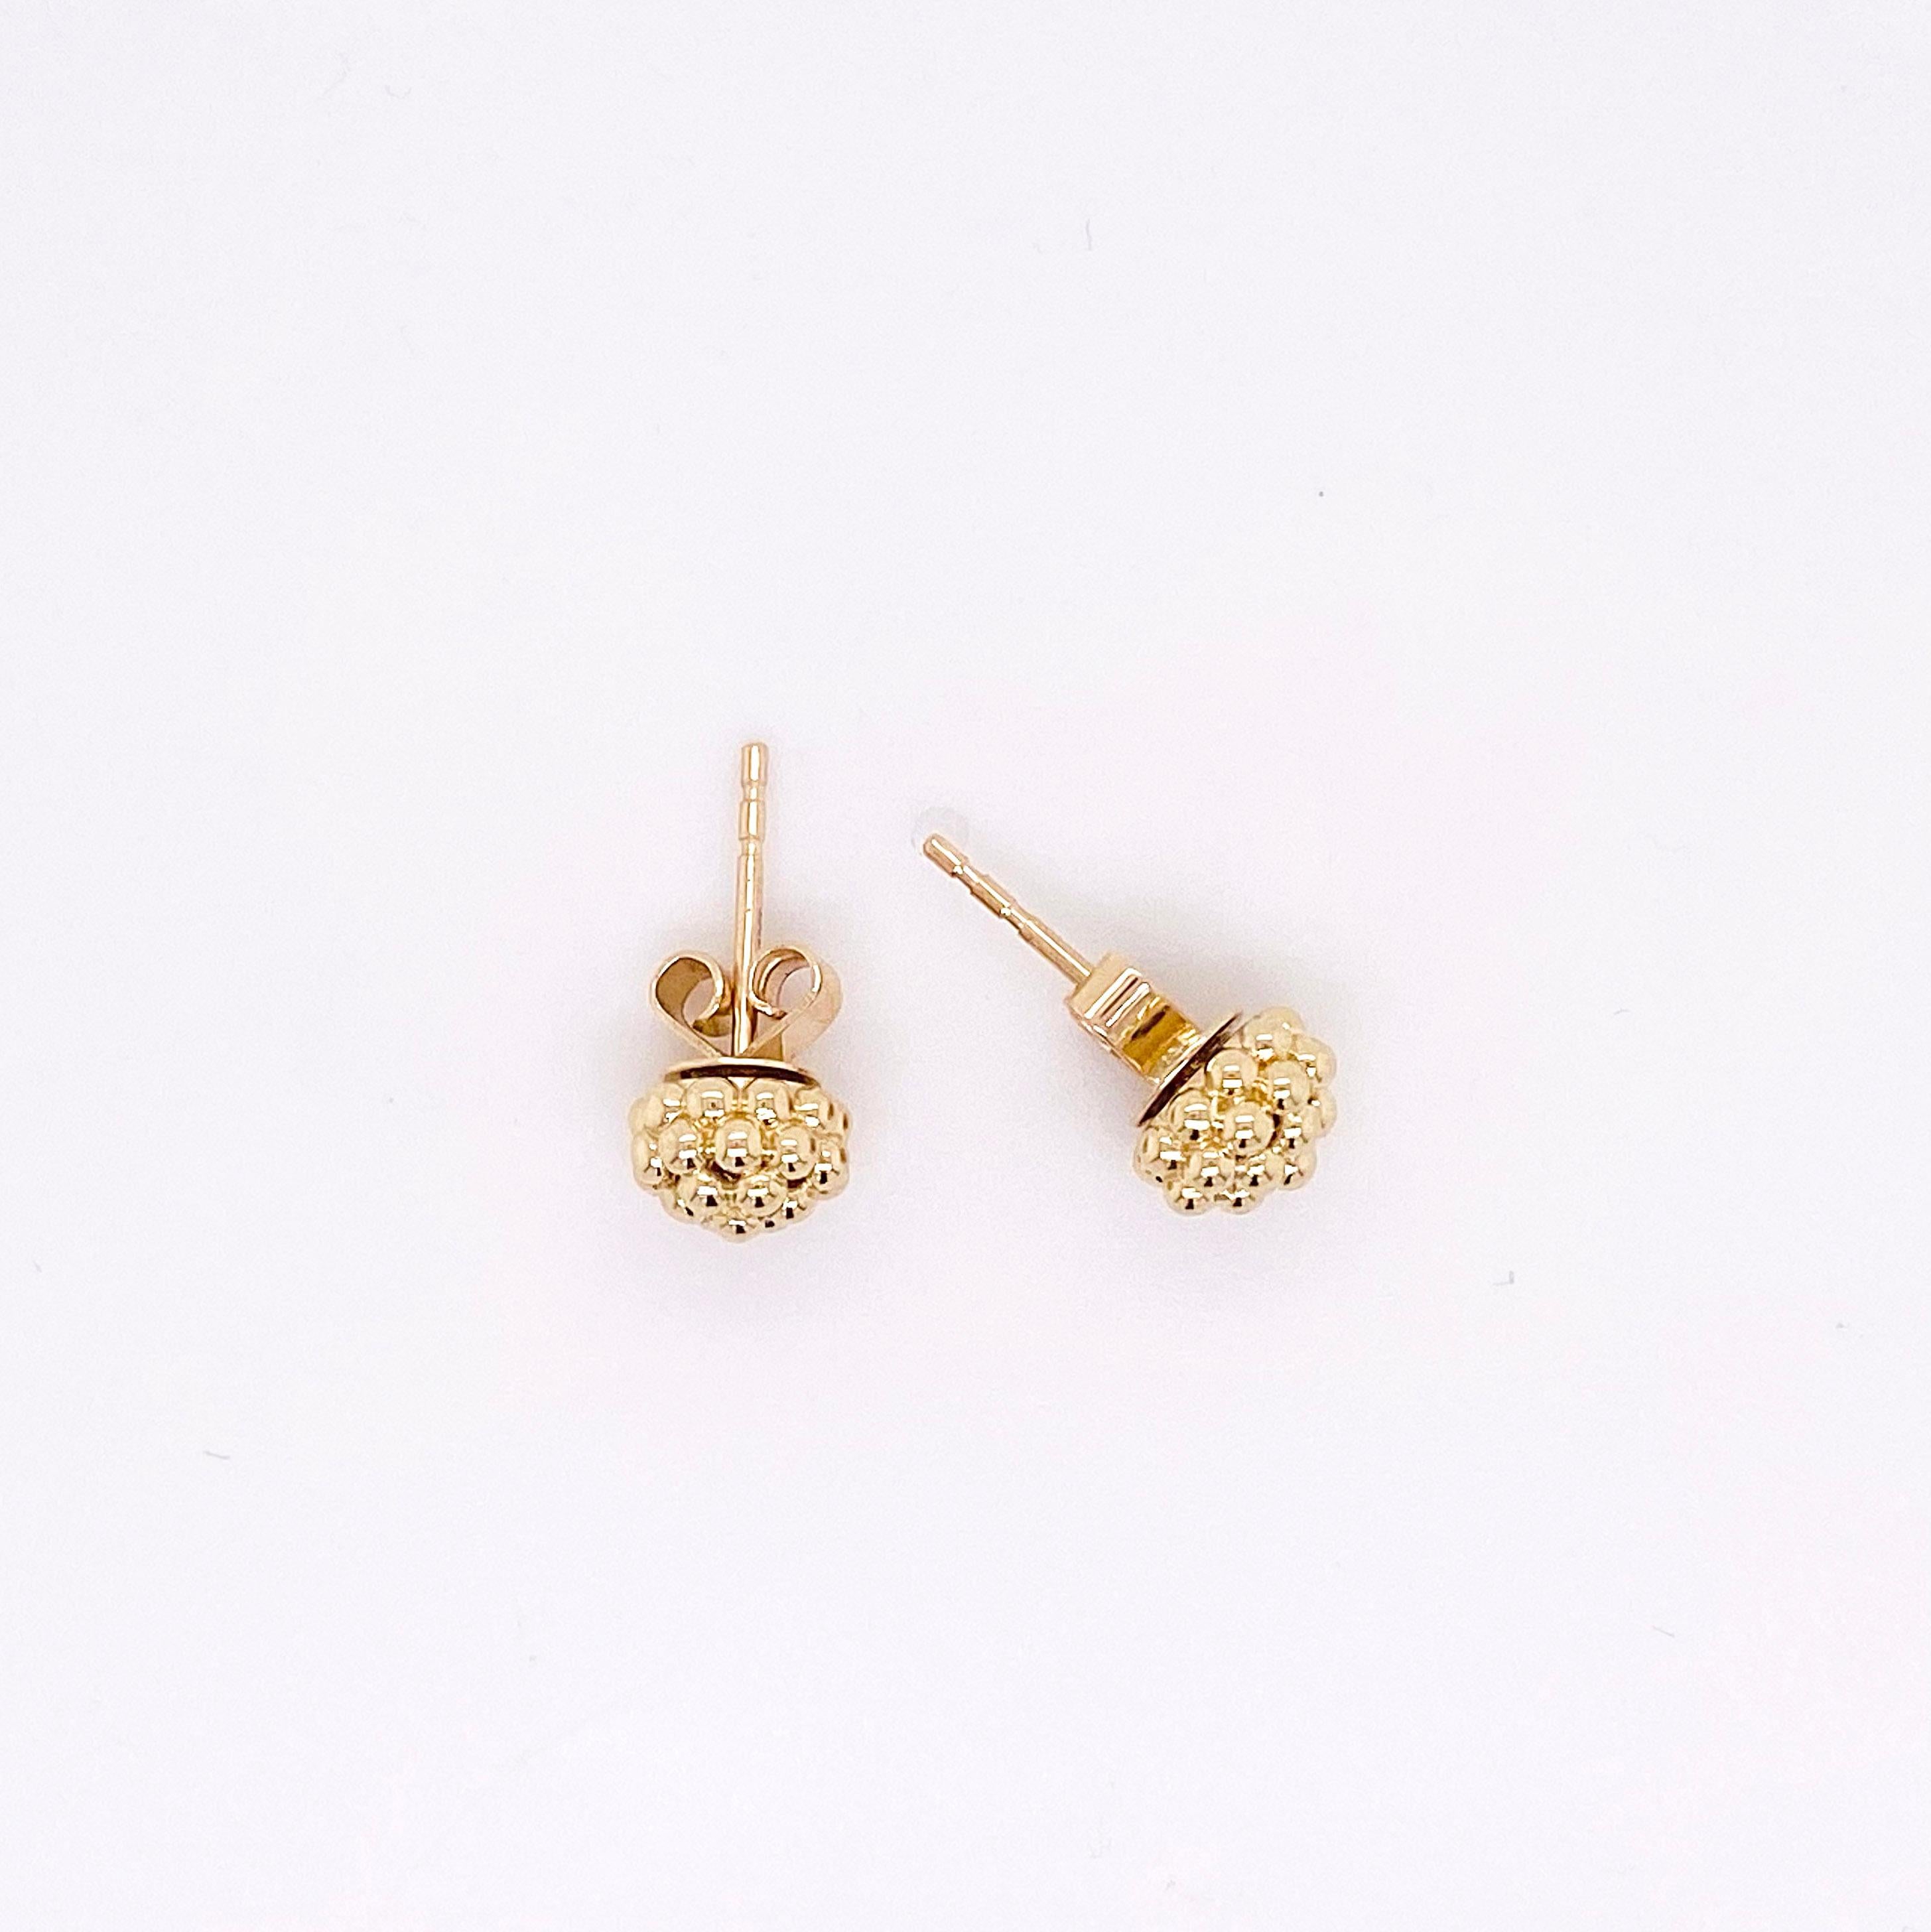 Cavier Beaded Stud Earrings, 14K Yellow Gold Bead Cluster Post Earrings, Cavier In New Condition For Sale In Austin, TX